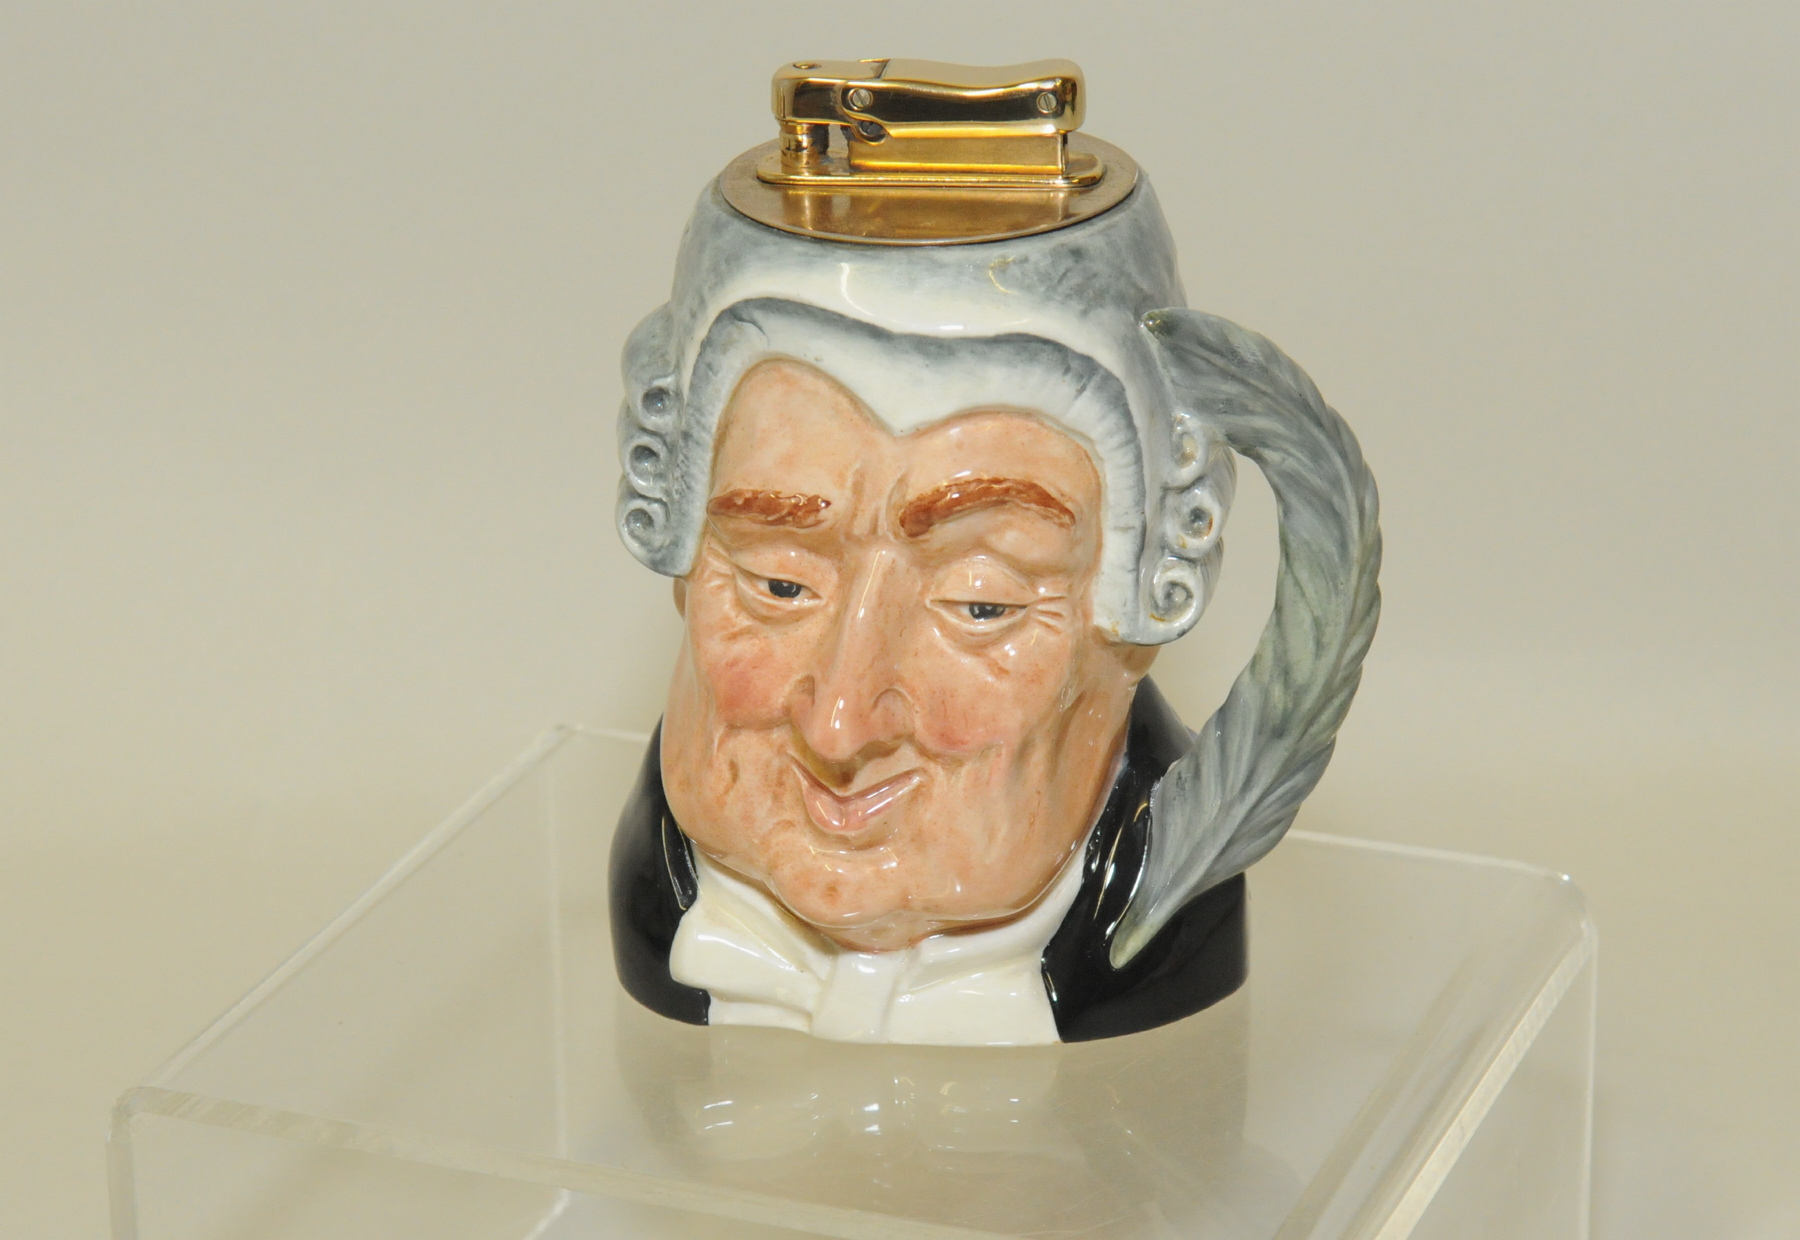 Royal Doulton table lighter "The Lawyer", D6504, 3½ high.